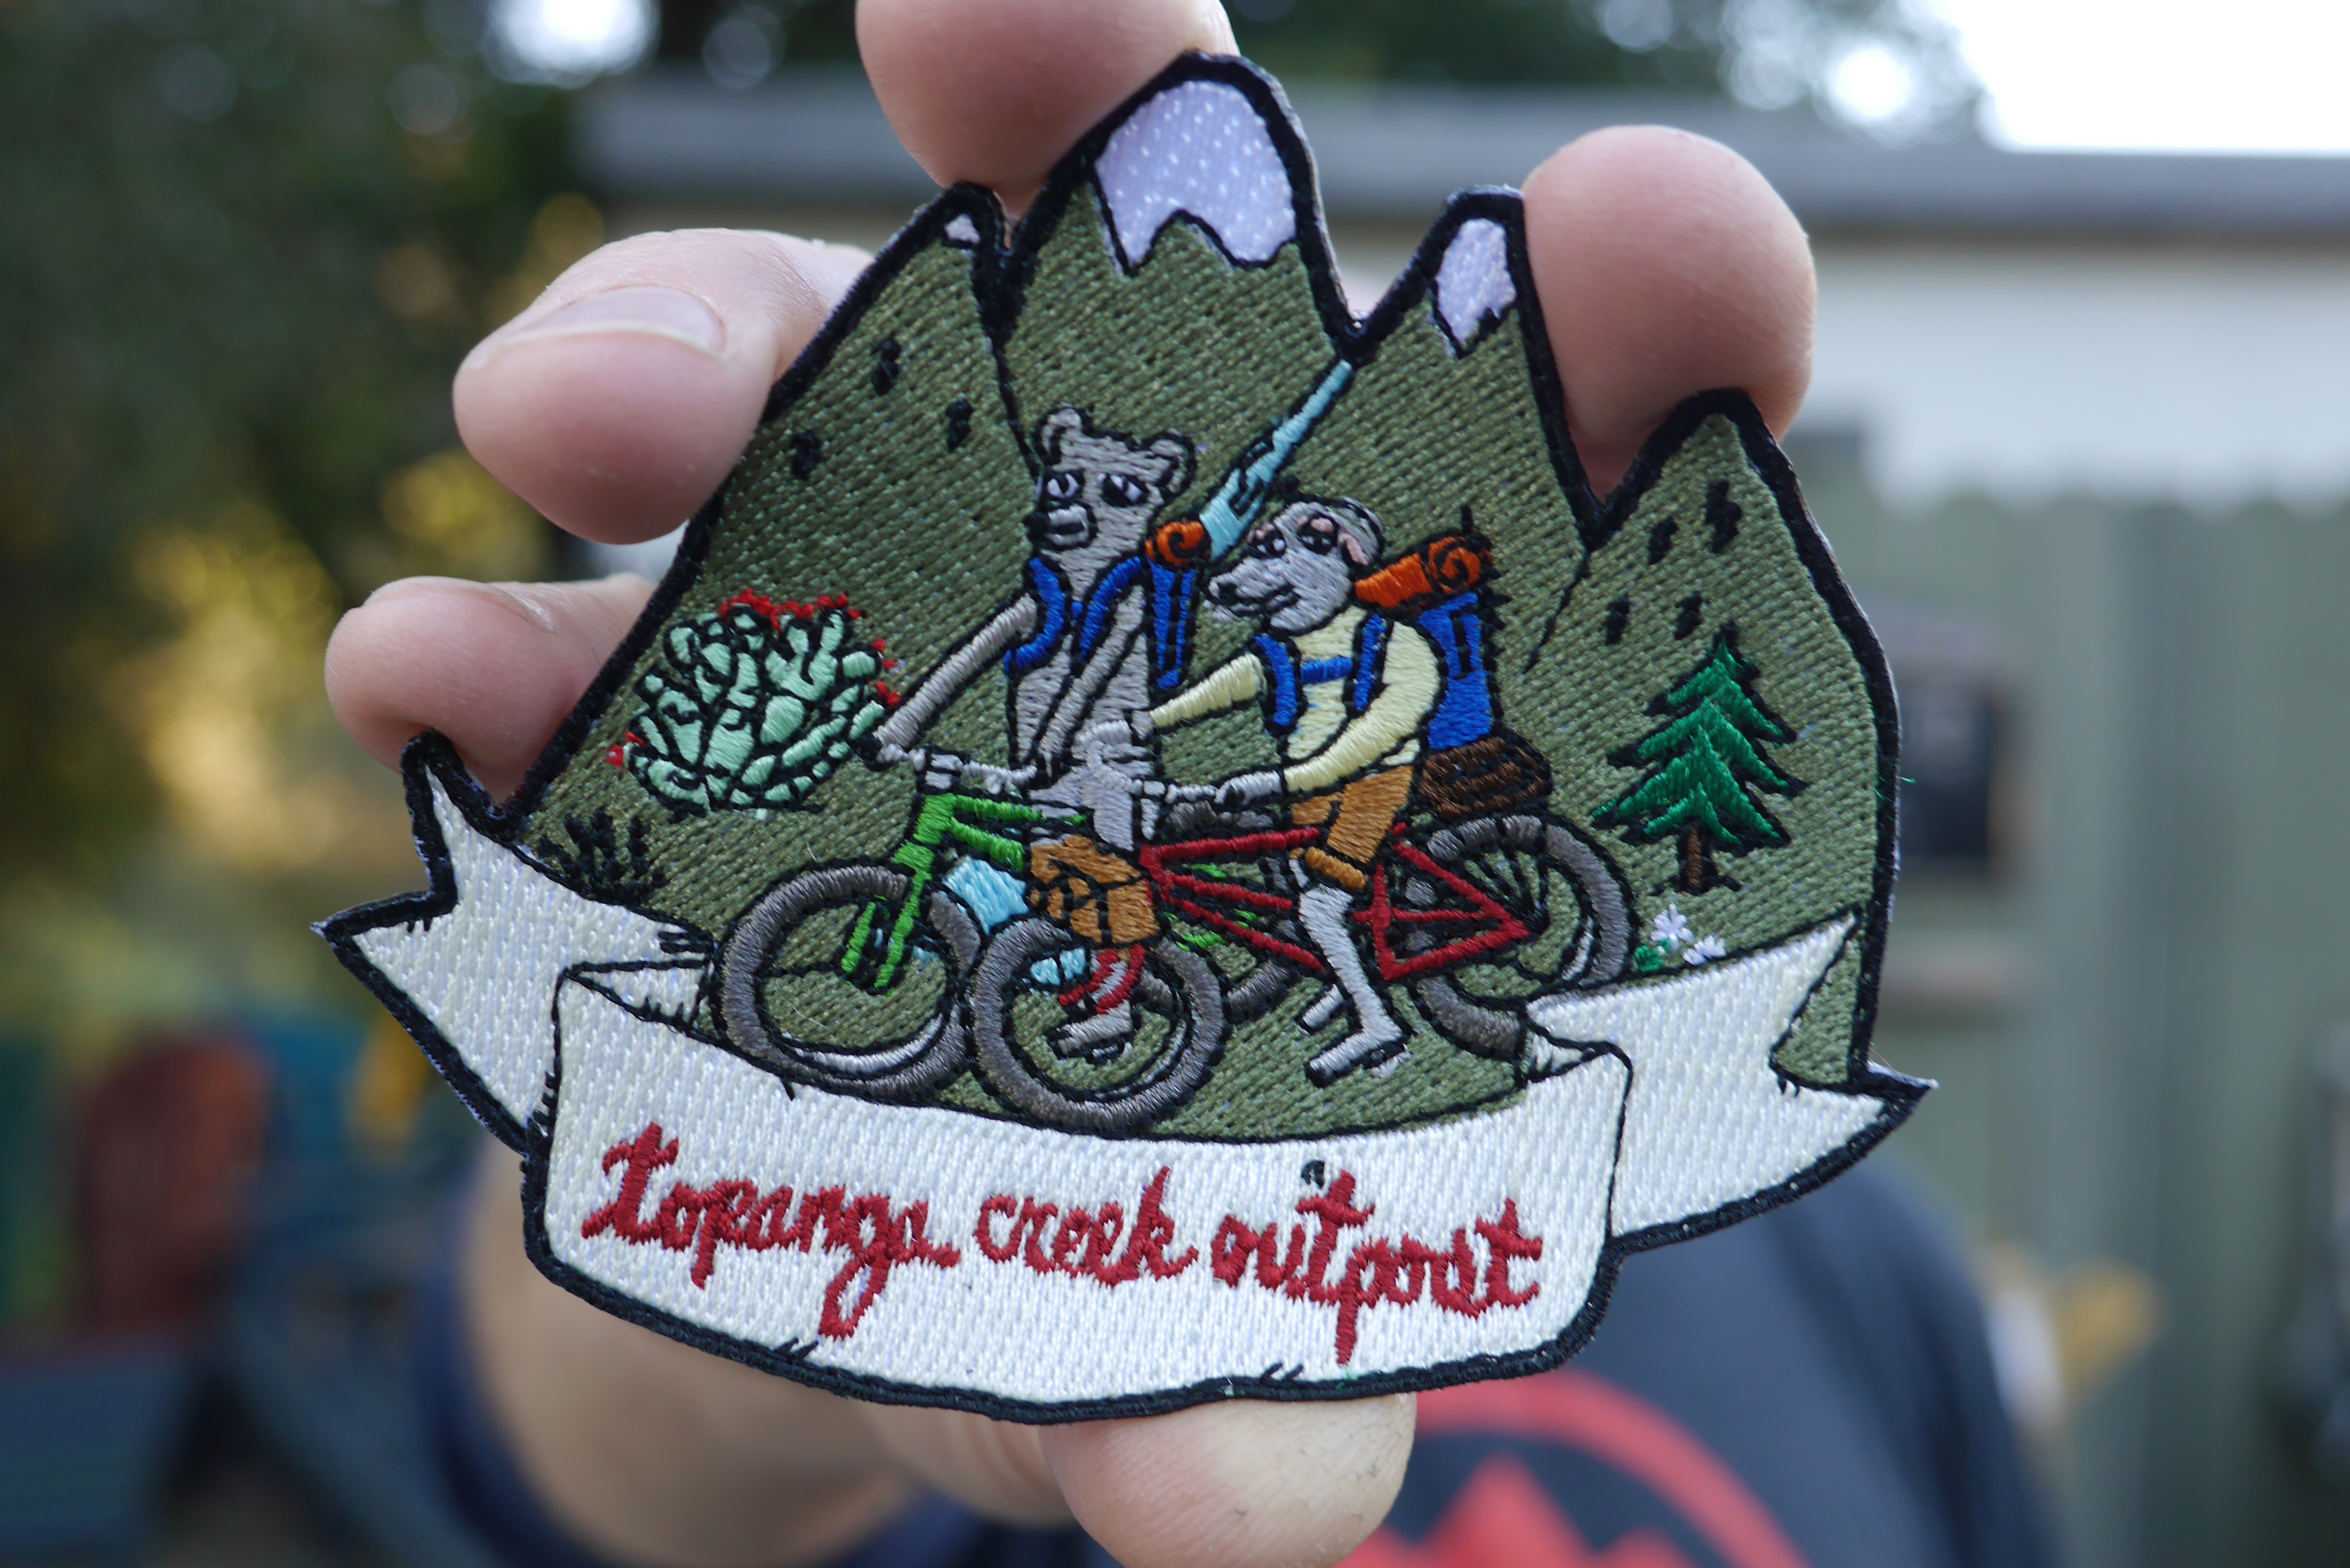 Sean and Fallscreek outdid themselves with our patches....